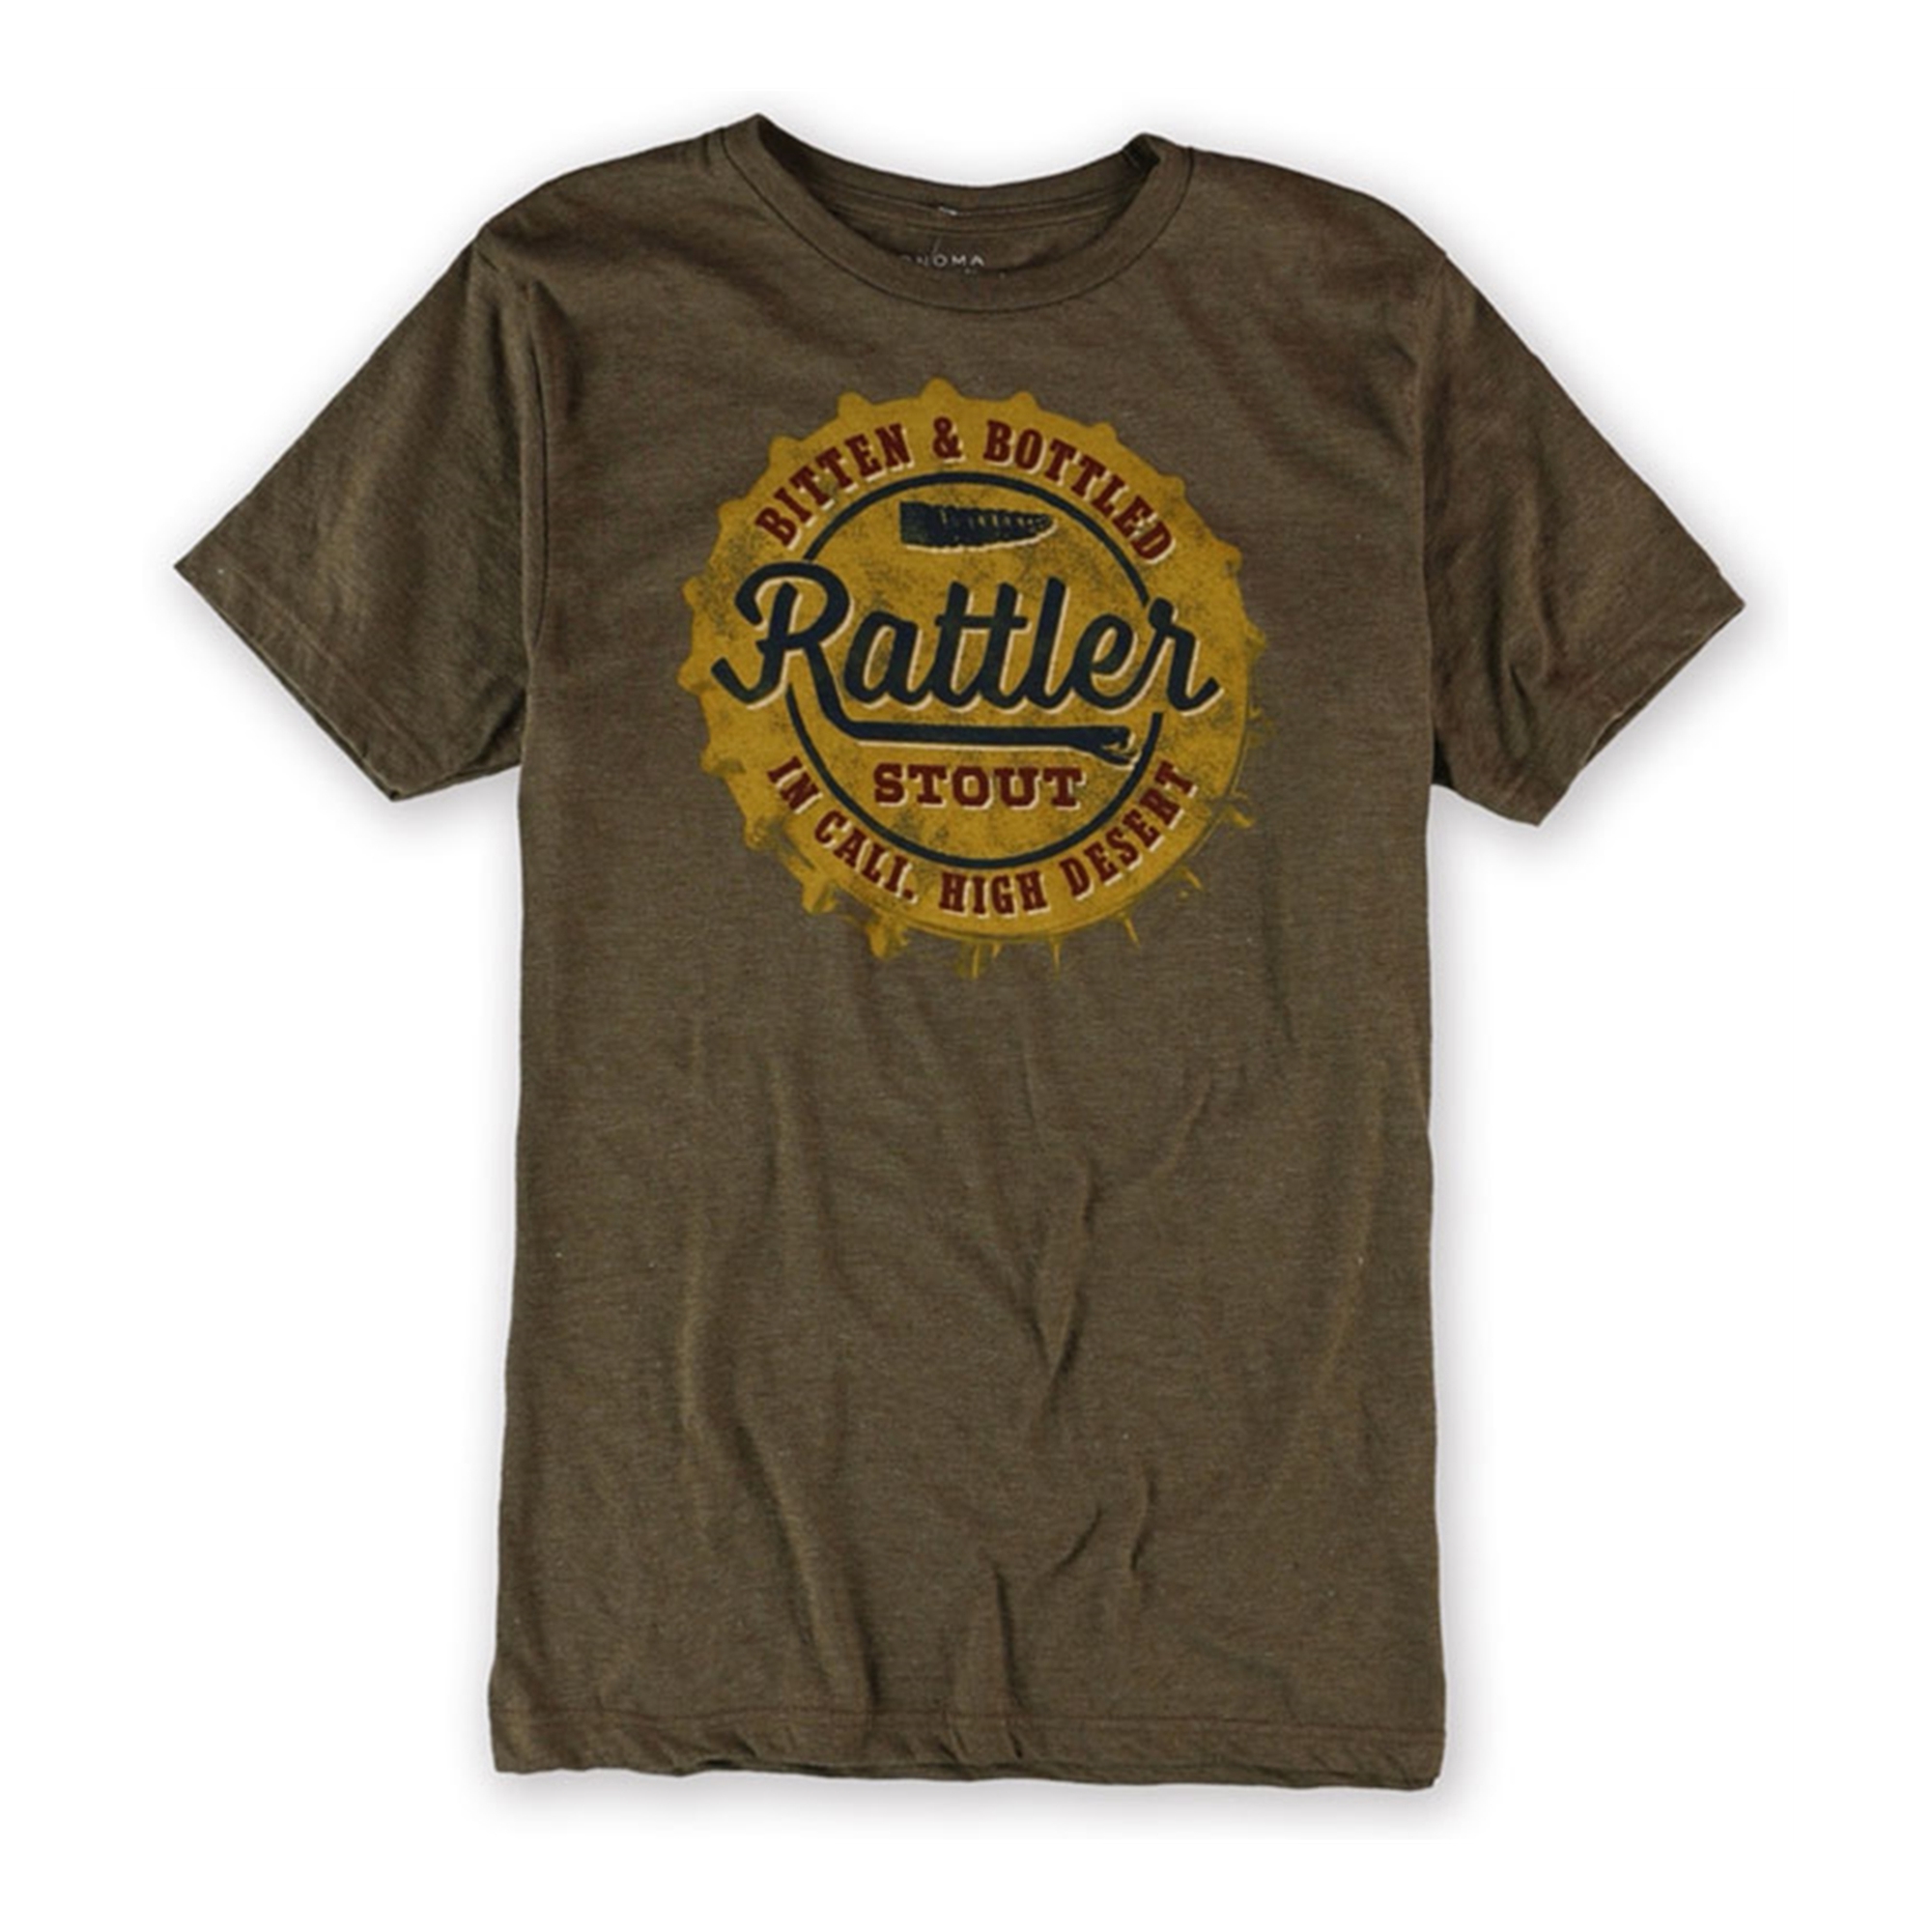 SONOMA life+style Mens Rattler Stout Bottlecap Graphic T-Shirt, Brown, Small - image 1 of 1